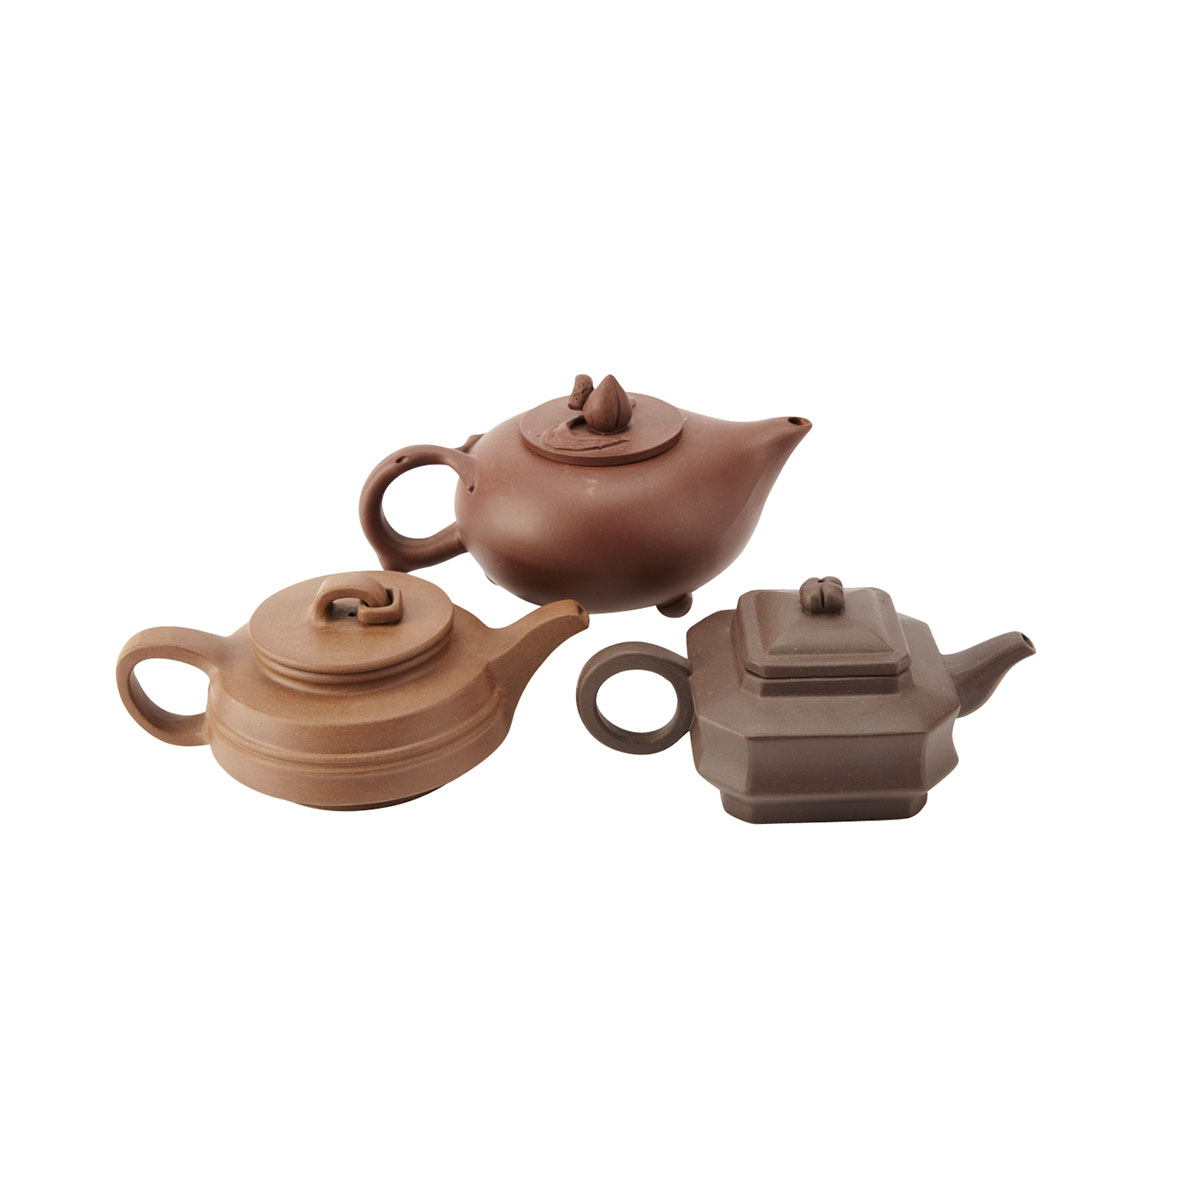 Three Yixing Teapots   The first